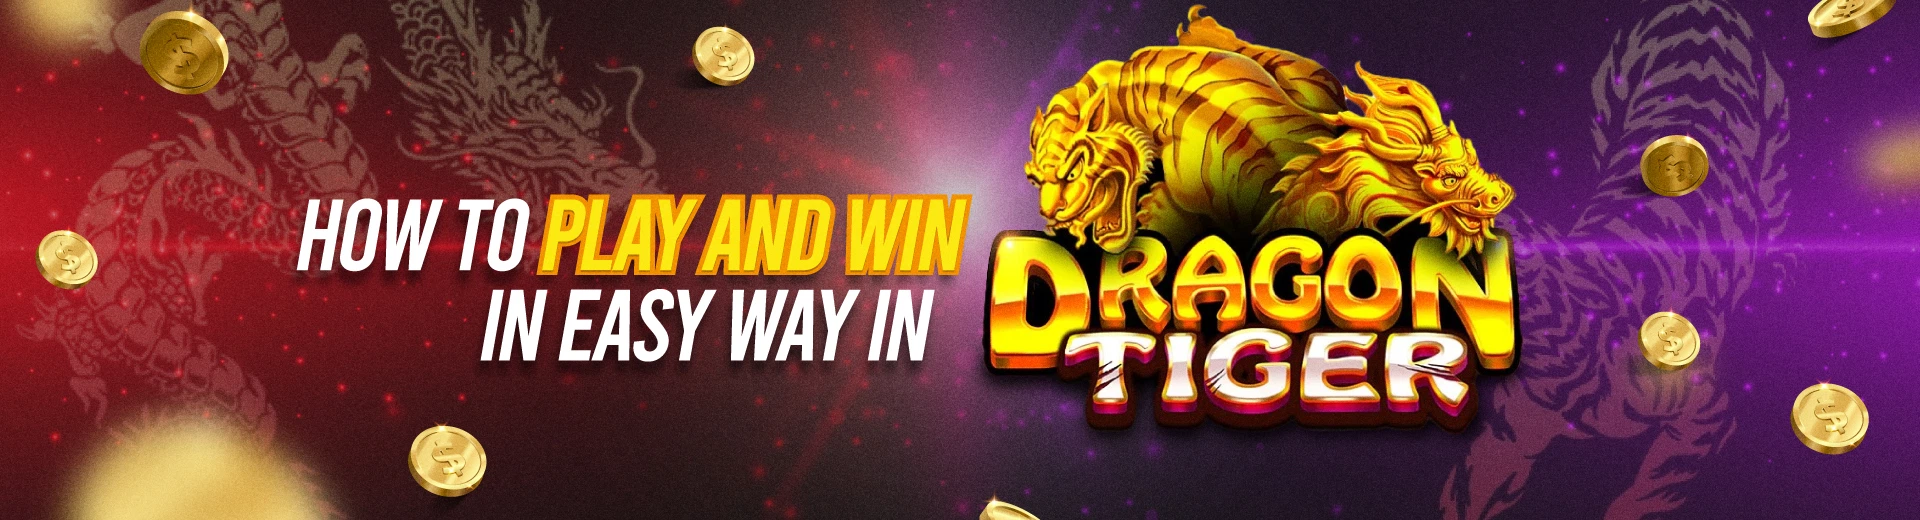 Dragon Tiger at OKBET Casino: How to Play And Win In Easy Way - OKBET casino game